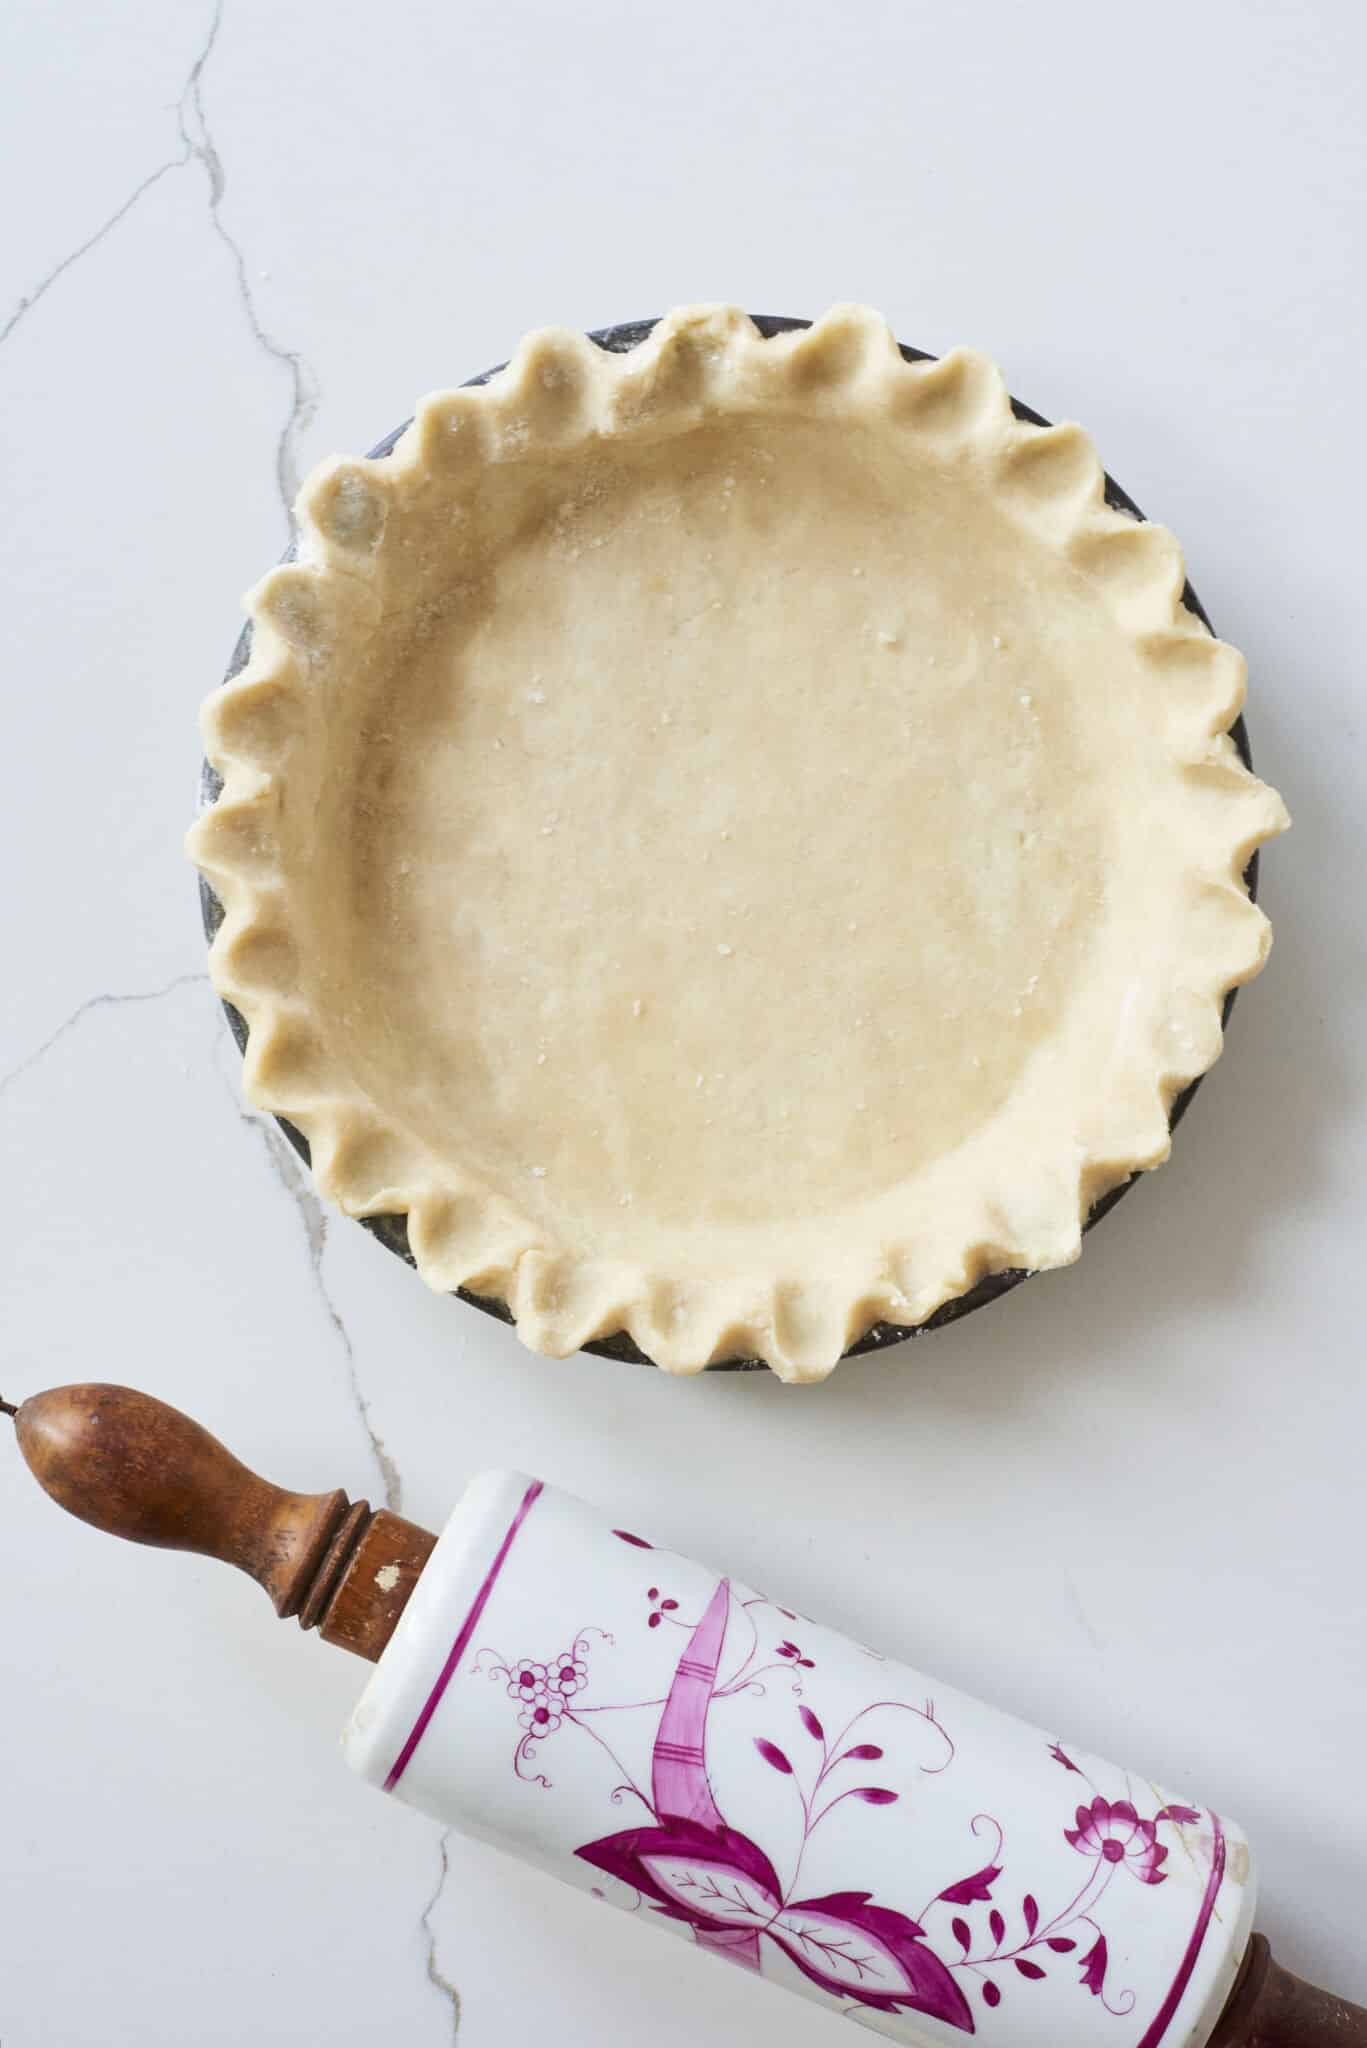 6 Best Pie Making Tools - Pie Crust and Decorating Utensils and How to Use  Them